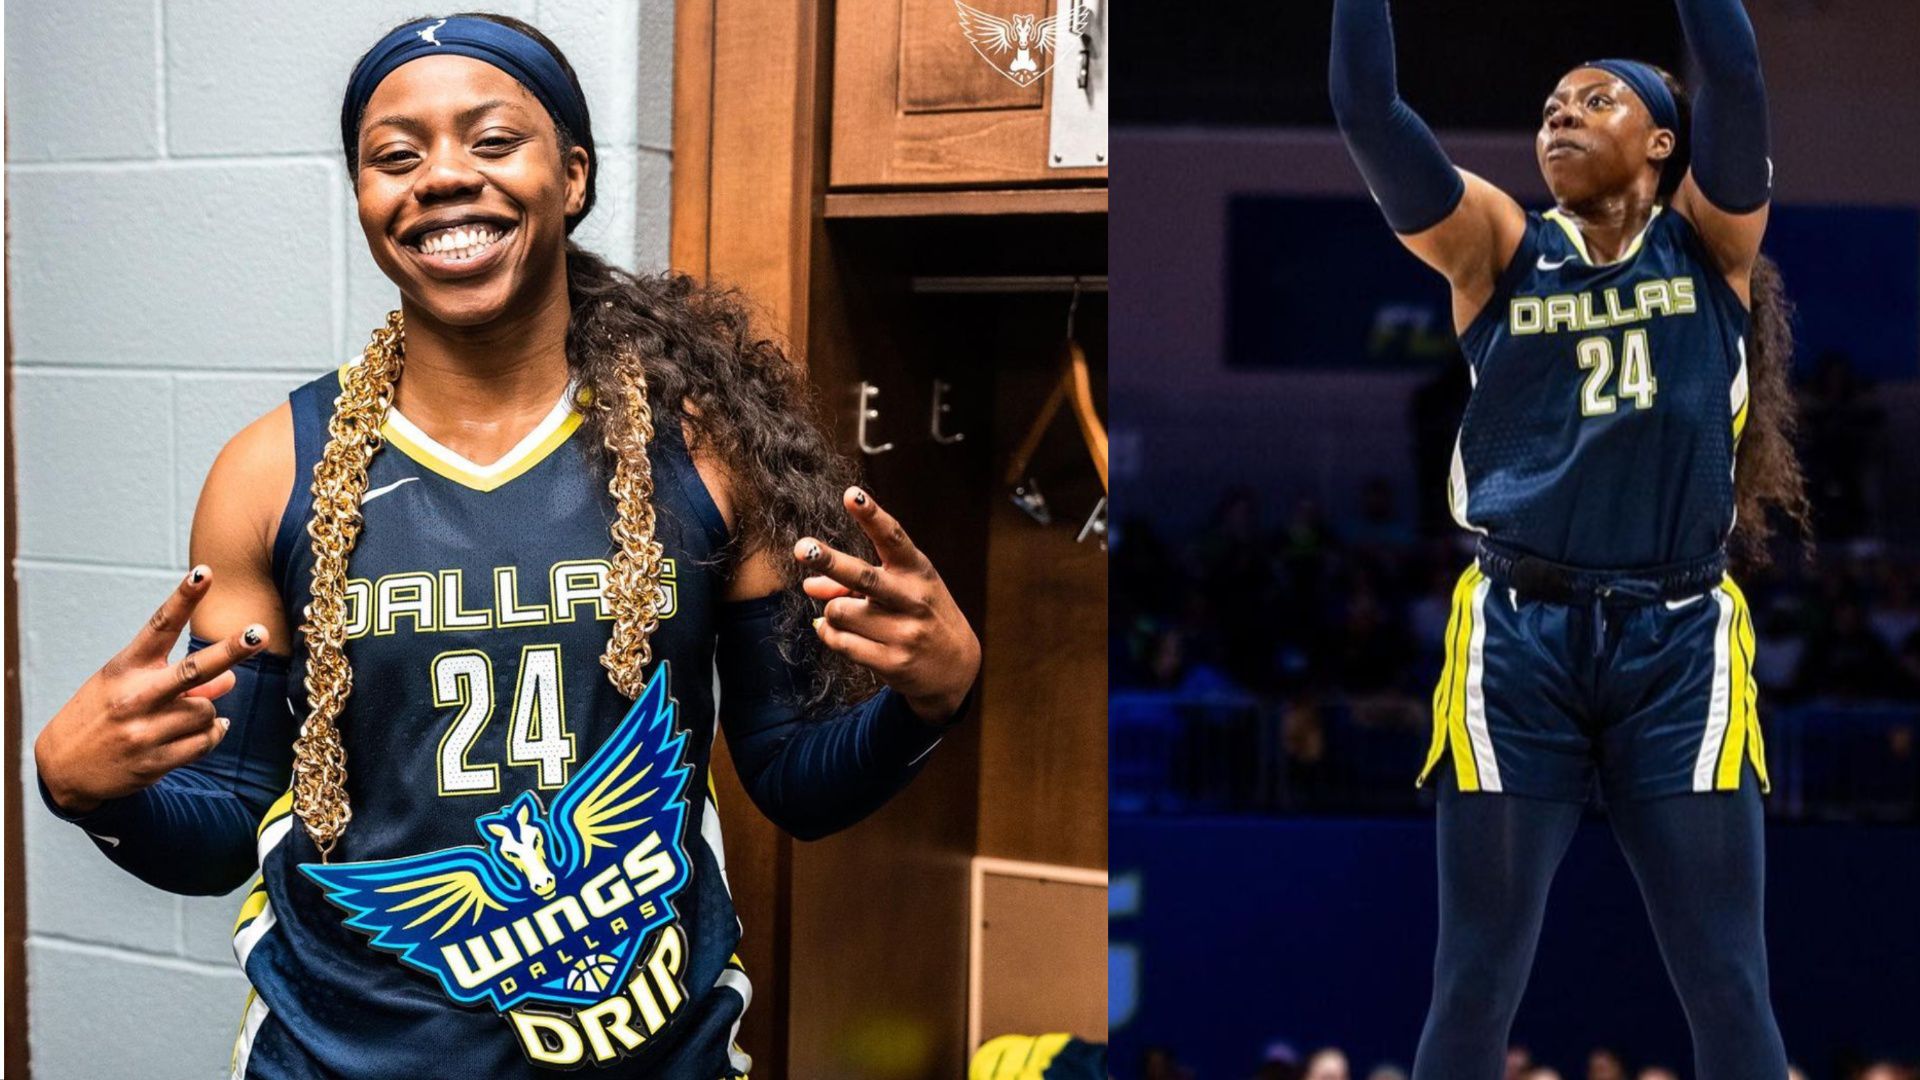 Dallas Wings' Arike Ogunbowale might be the new face of the WNBA